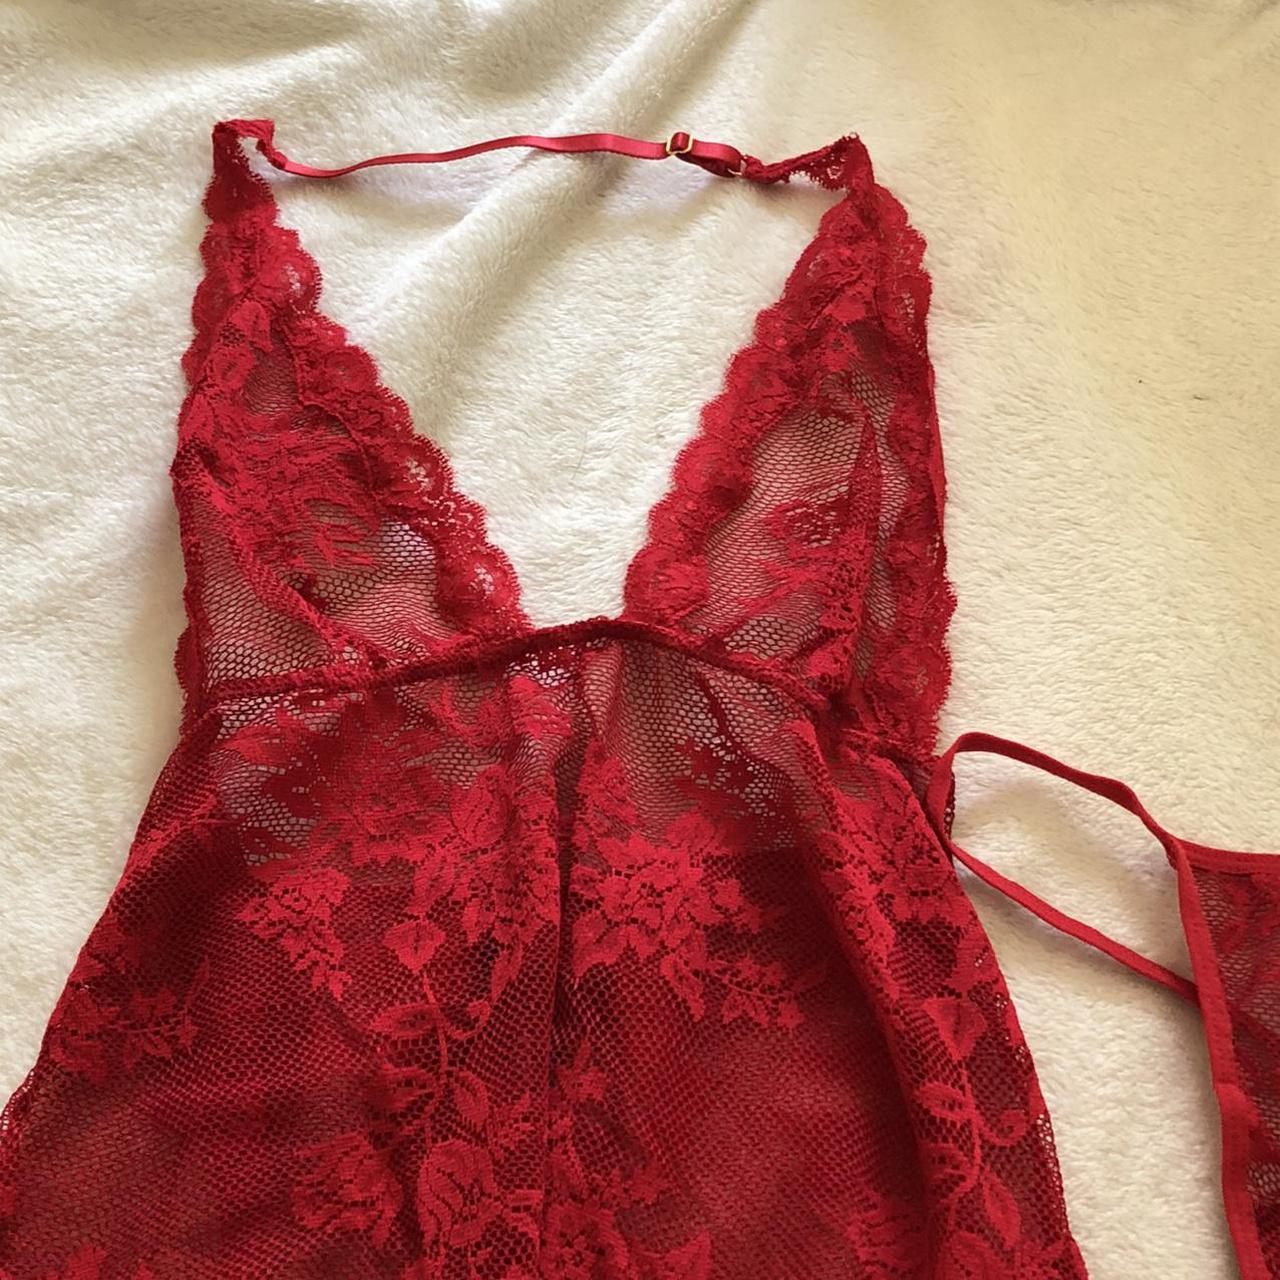 red lace teddy & panty lingerie set🧸 never worn, was... - Depop